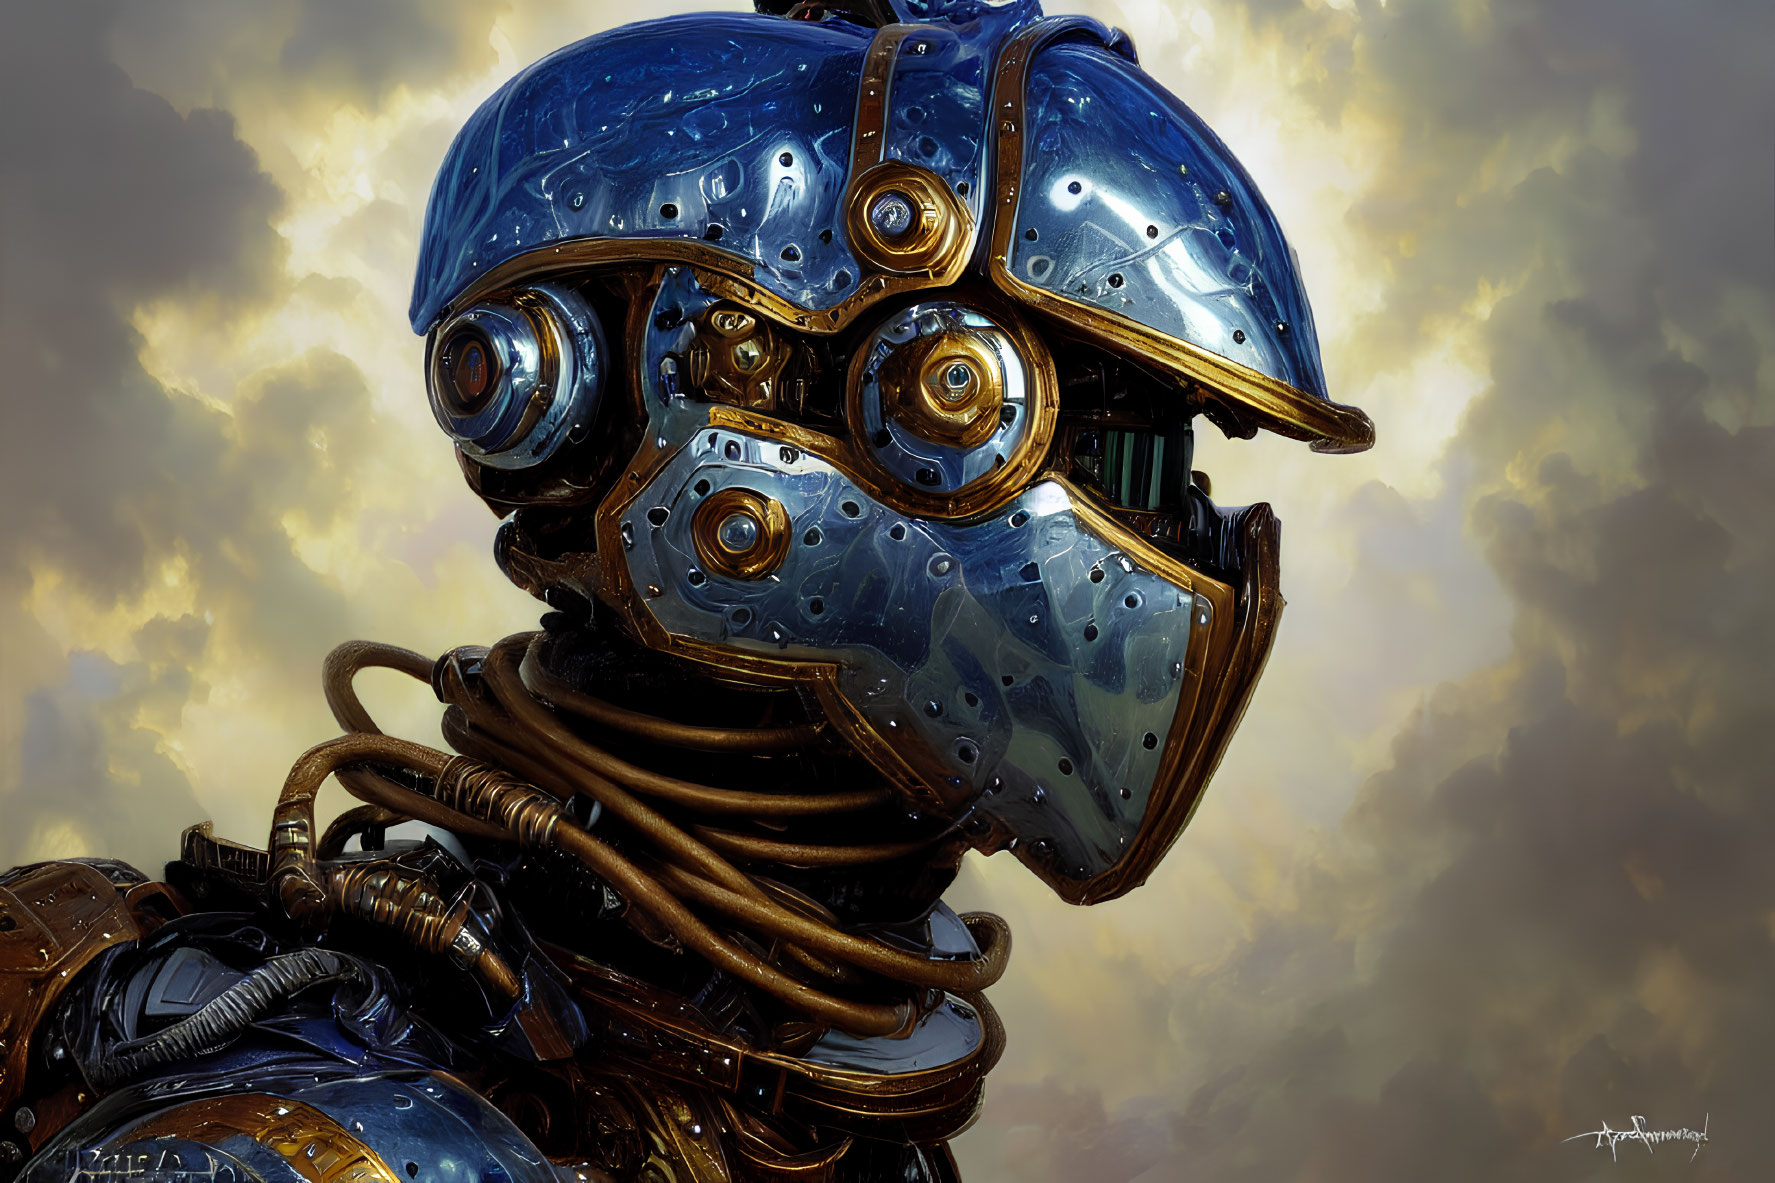 Robotic head with blue helmet and intricate designs against cloudy sky.